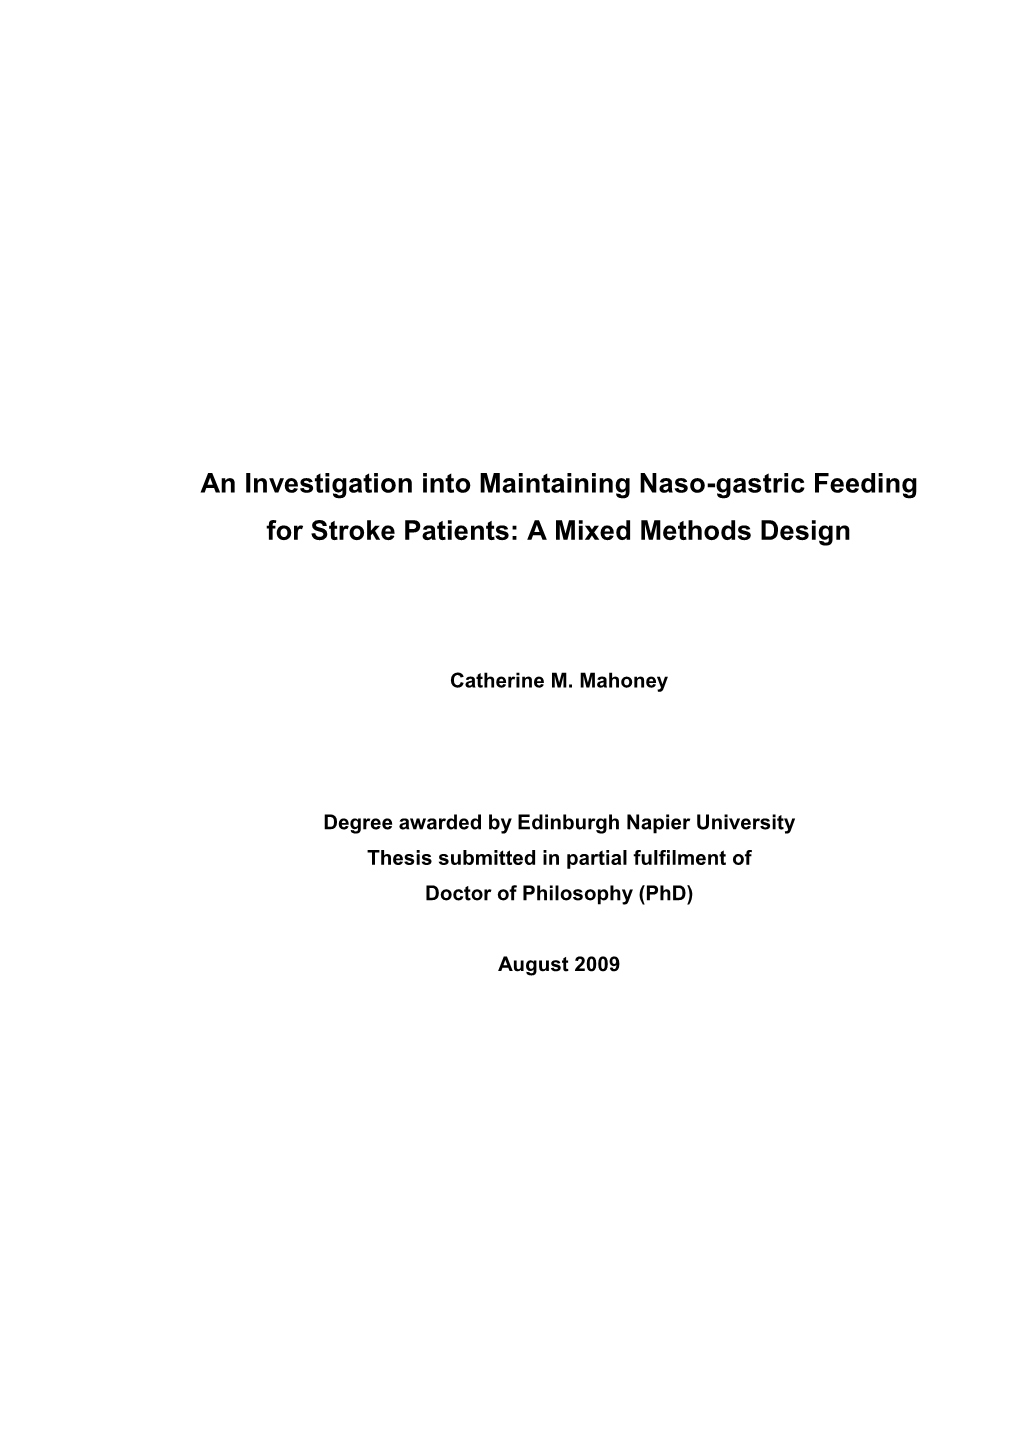 An Investigation Into Maintaining Naso-Gastric Feeding for Stroke Patients: a Mixed Methods Design